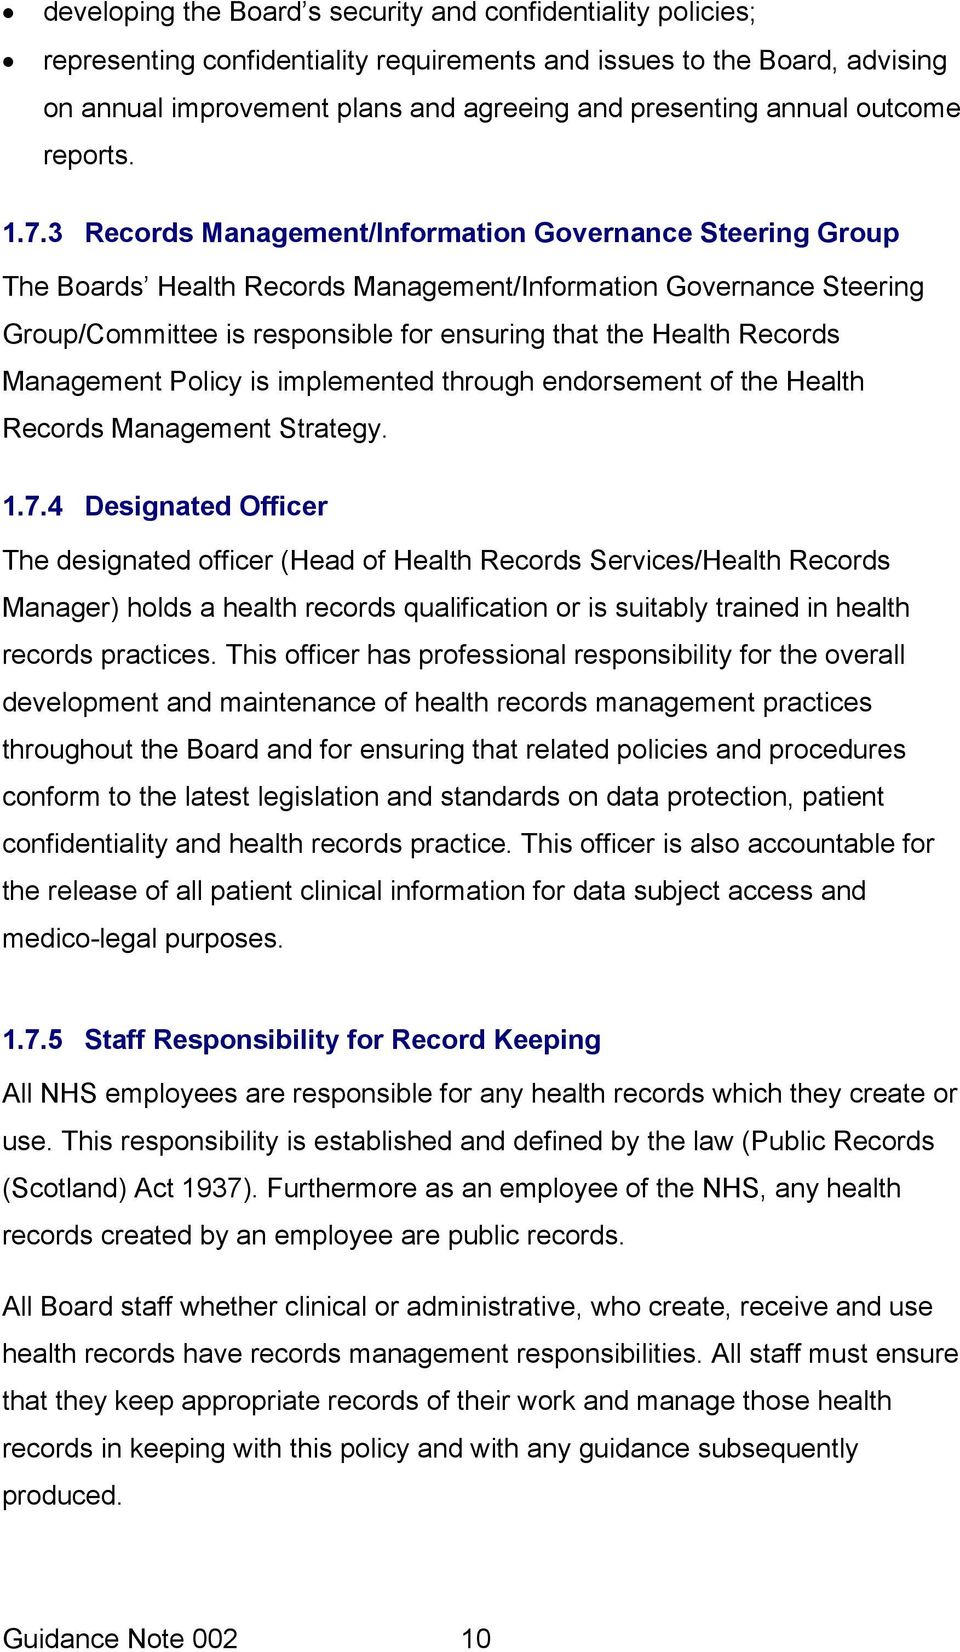 3 Records Management/Information Governance Steering Group The Boards Health Records Management/Information Governance Steering Group/Committee is responsible for ensuring that the Health Records